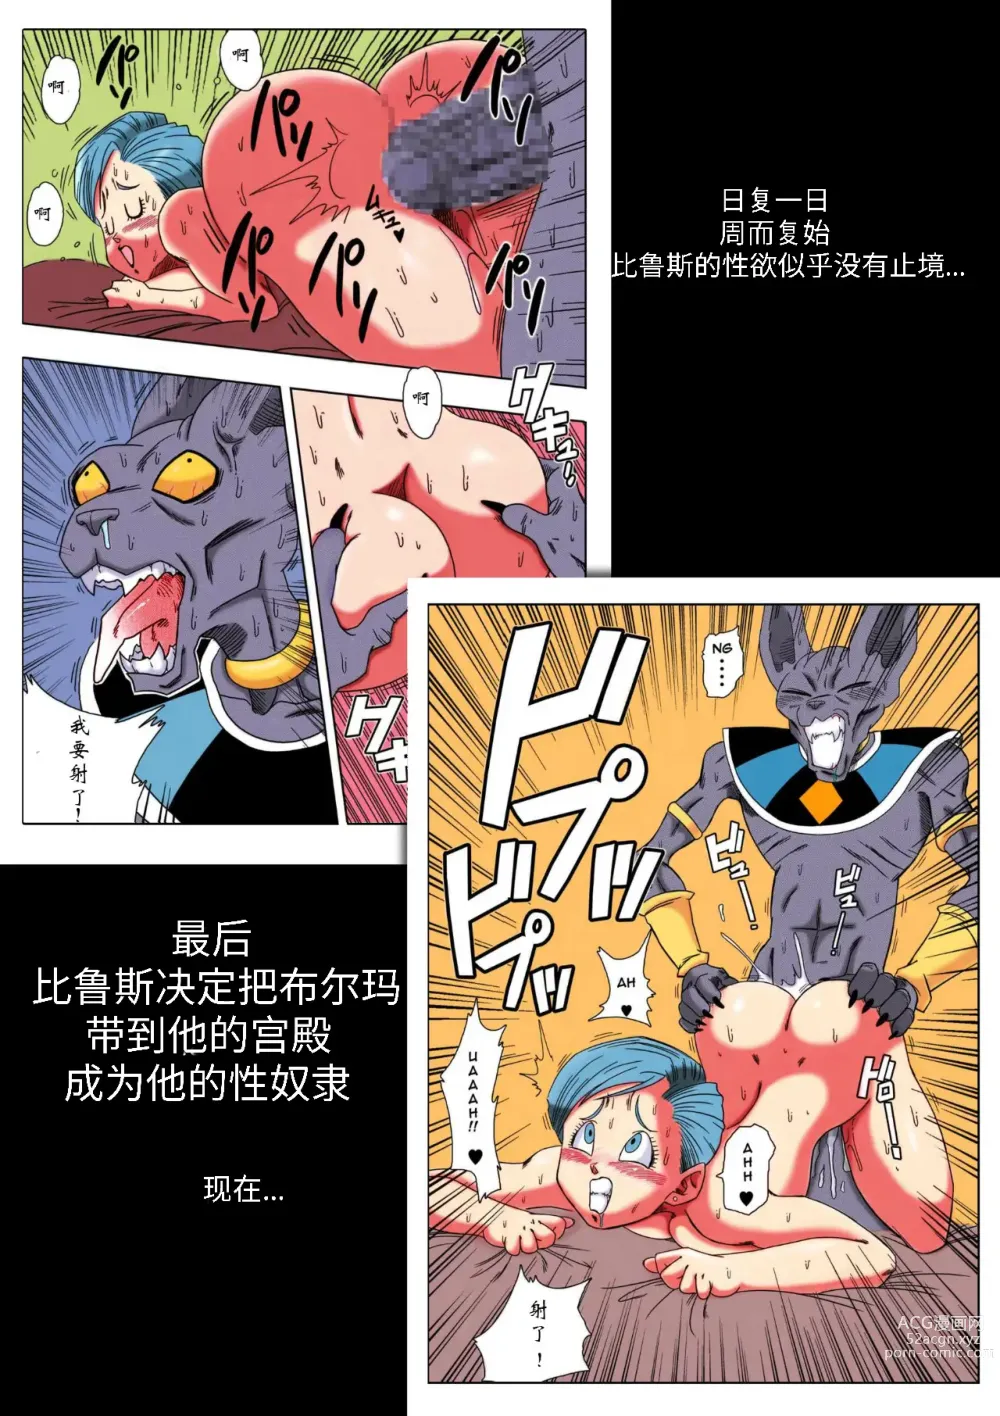 Page 4 of doujinshi 没人能违抗比鲁斯